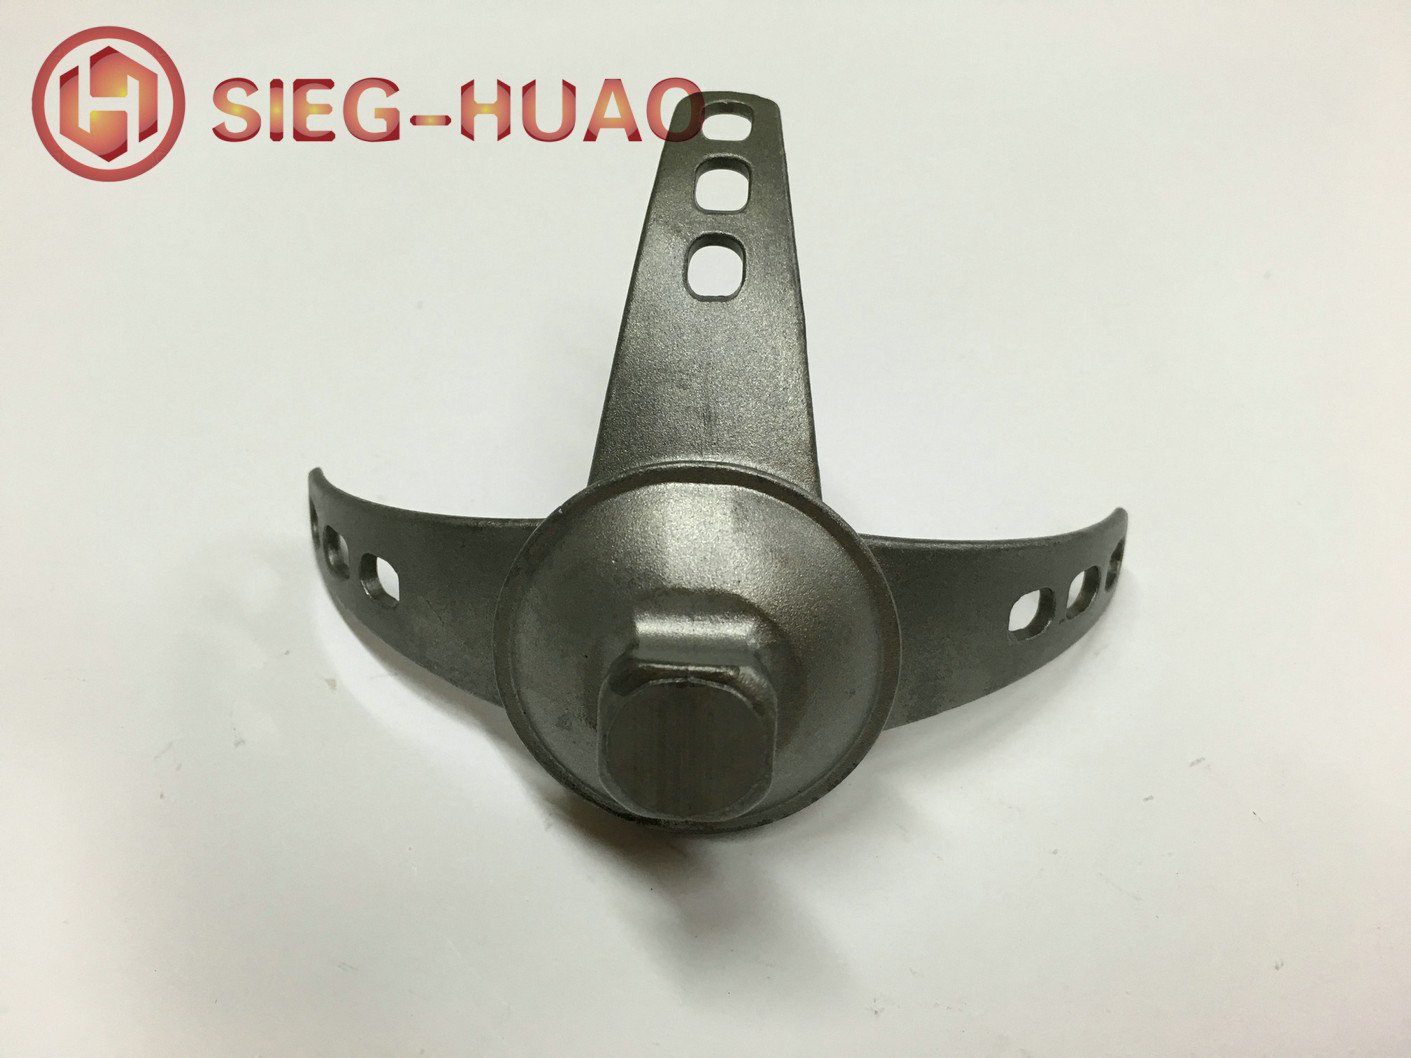 Investment Casting High Nickel Alloy Support for Artificial Limb